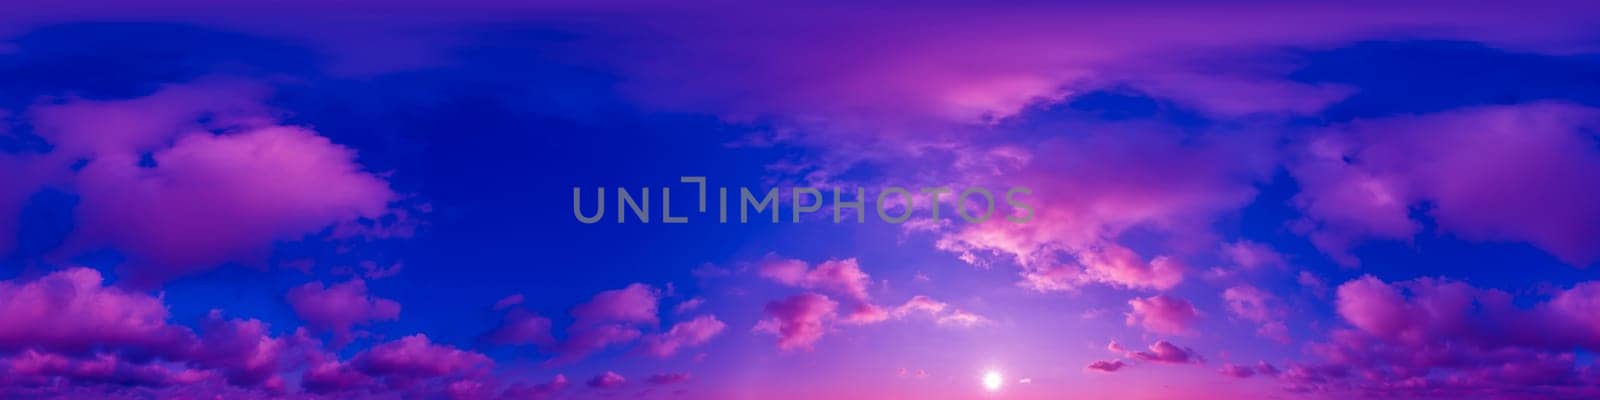 Blue sky panorama with magenta Cirrus clouds in Seamless spherical equirectangular format. Full zenith for use in 3D graphics, game and editing aerial drone 360 degree panoramas for sky replacement. by Matiunina